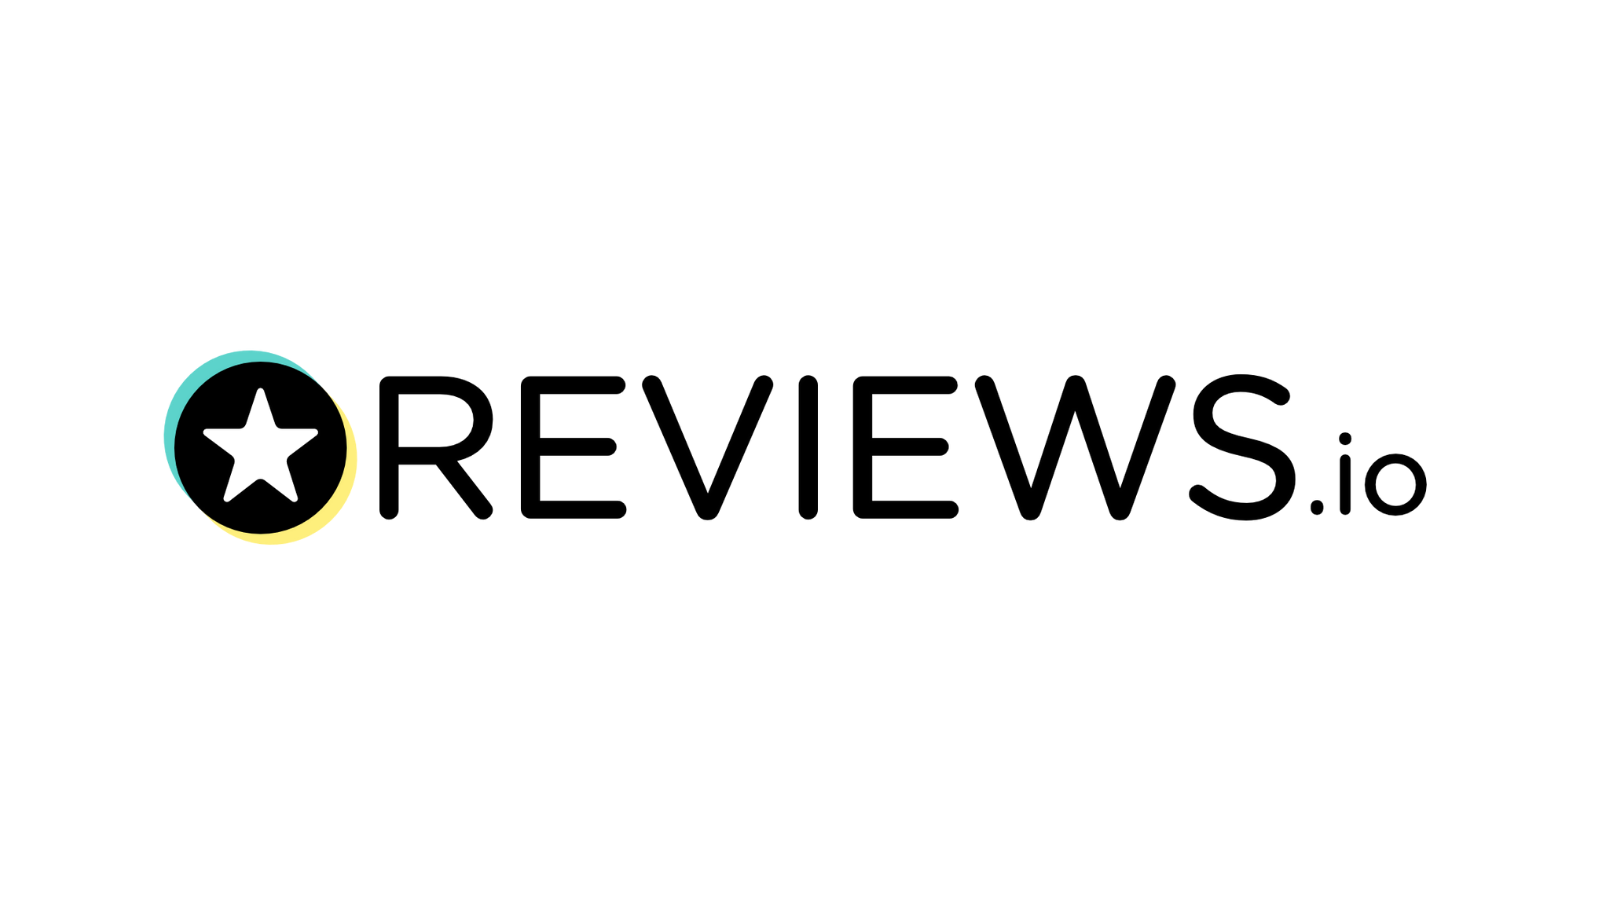 REVIEWS.io - Product Reviews Shopify App Store.